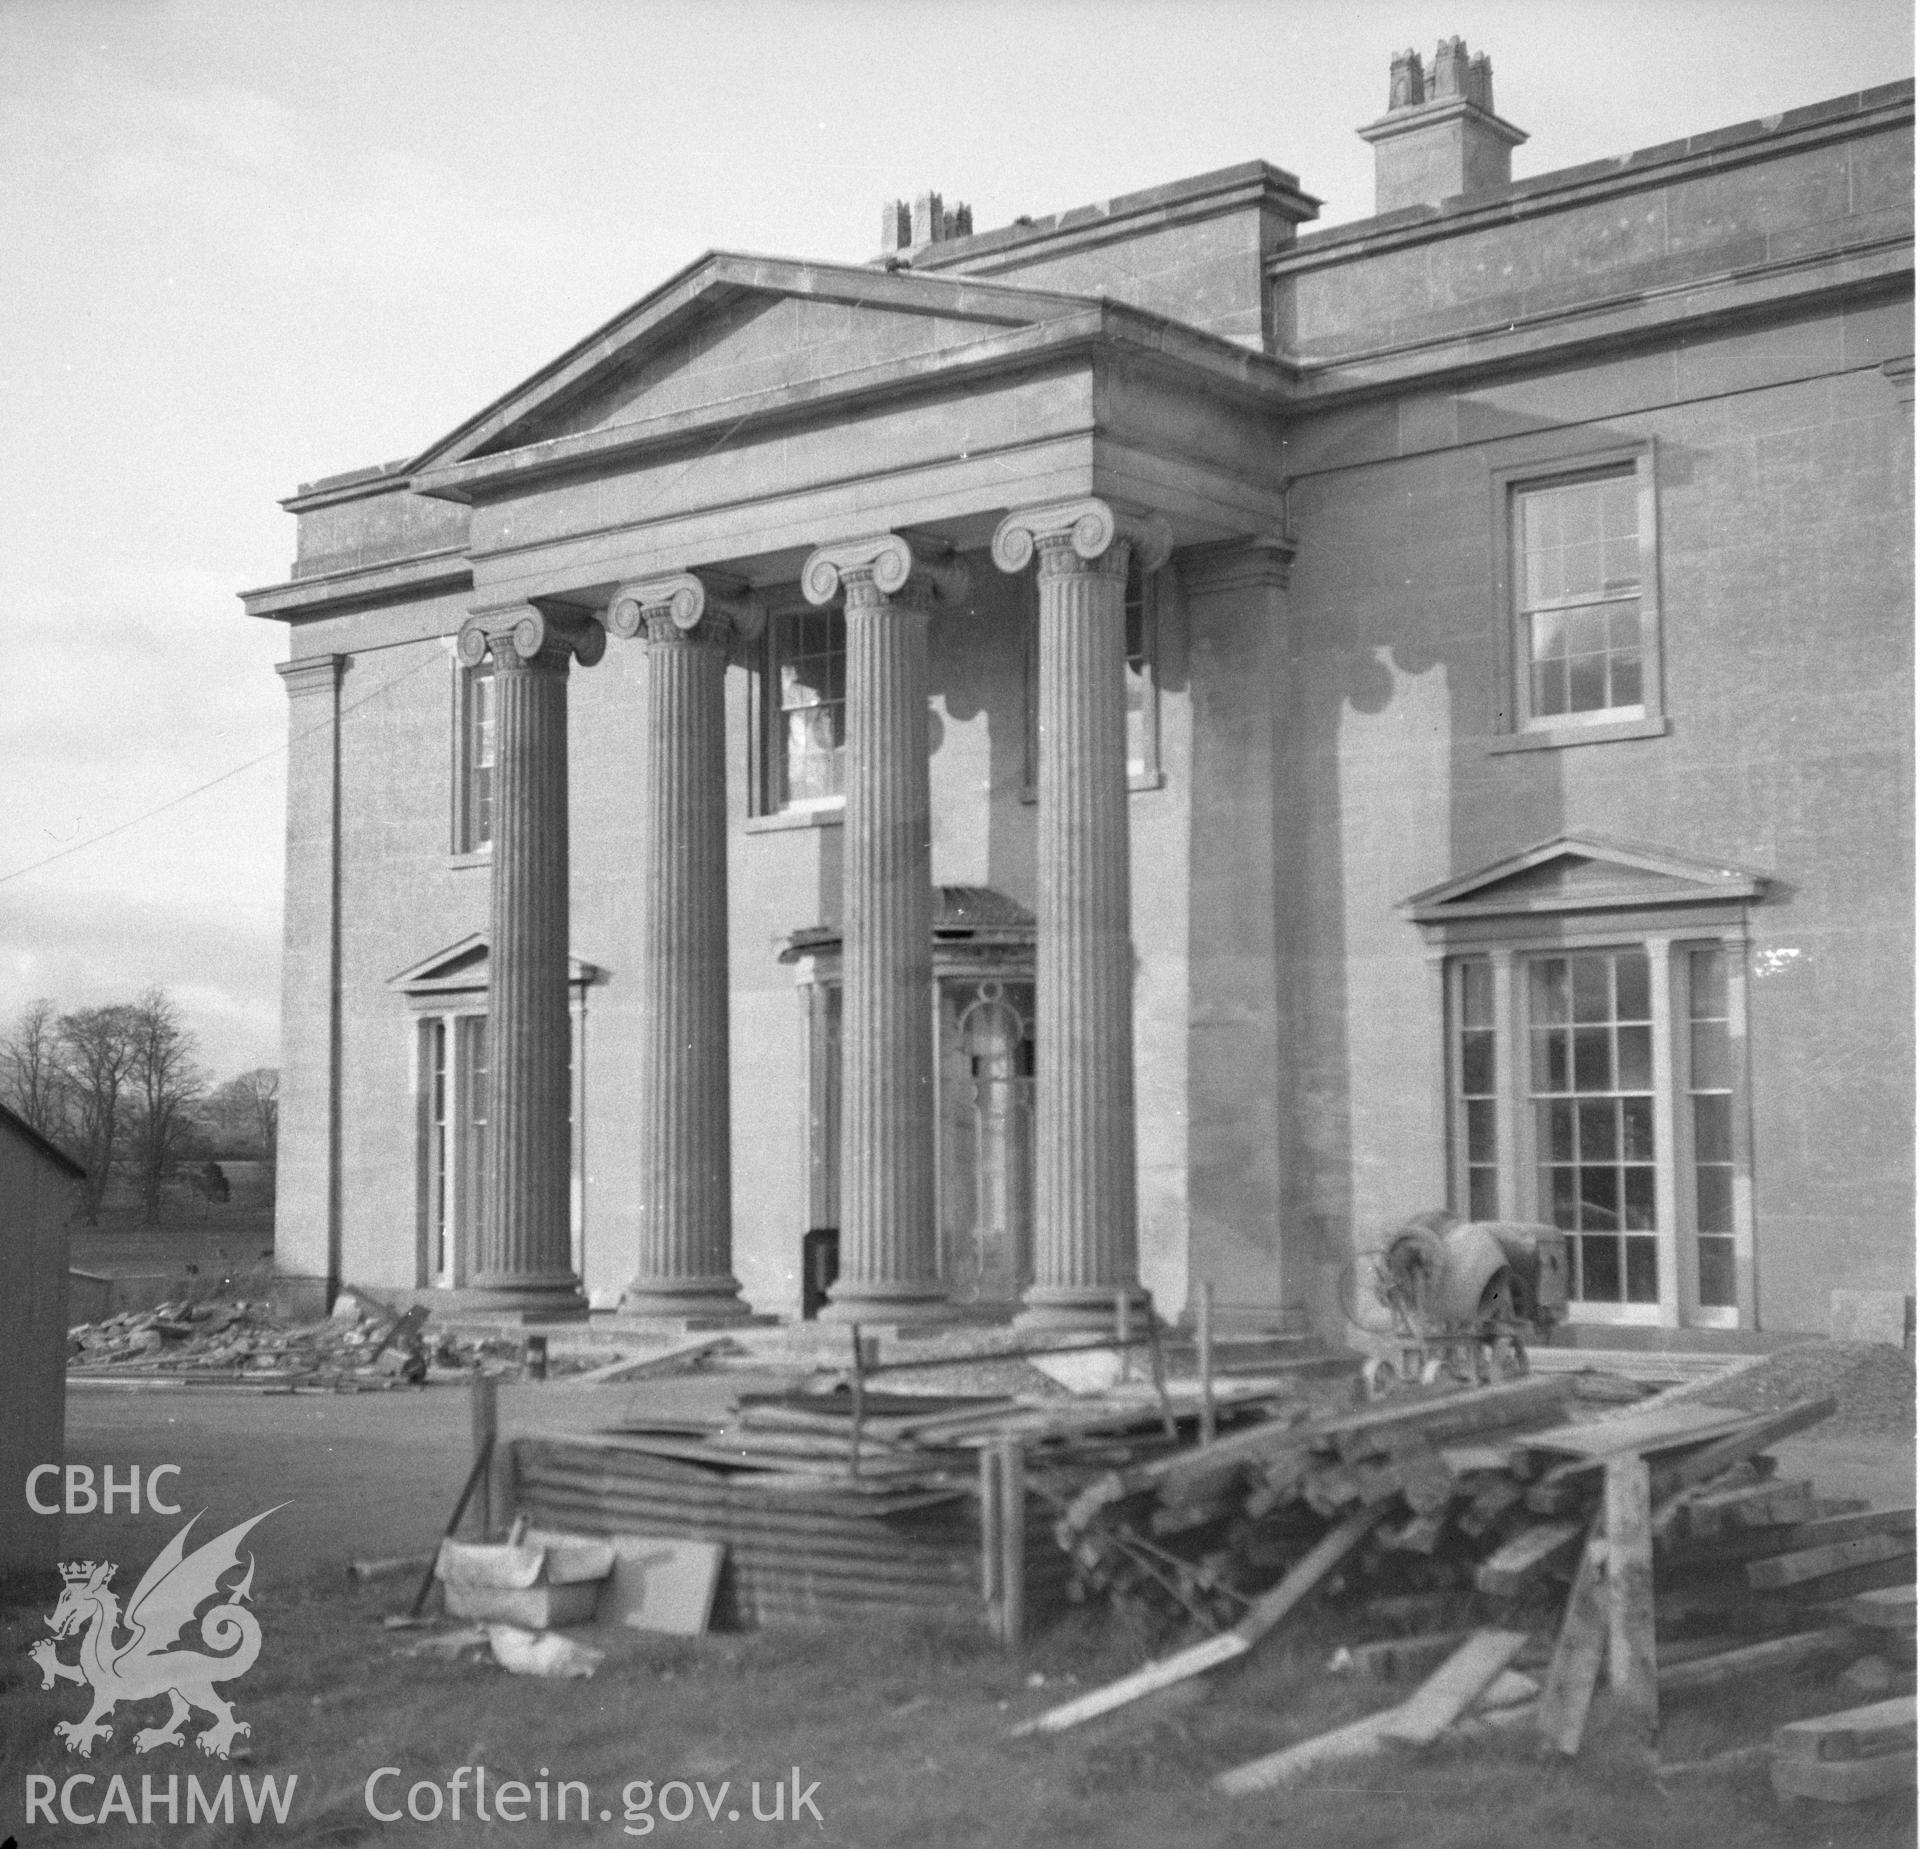 Digital copy of a nitrate negative showing view of building work at an unnamed house in or near Abergavenny.